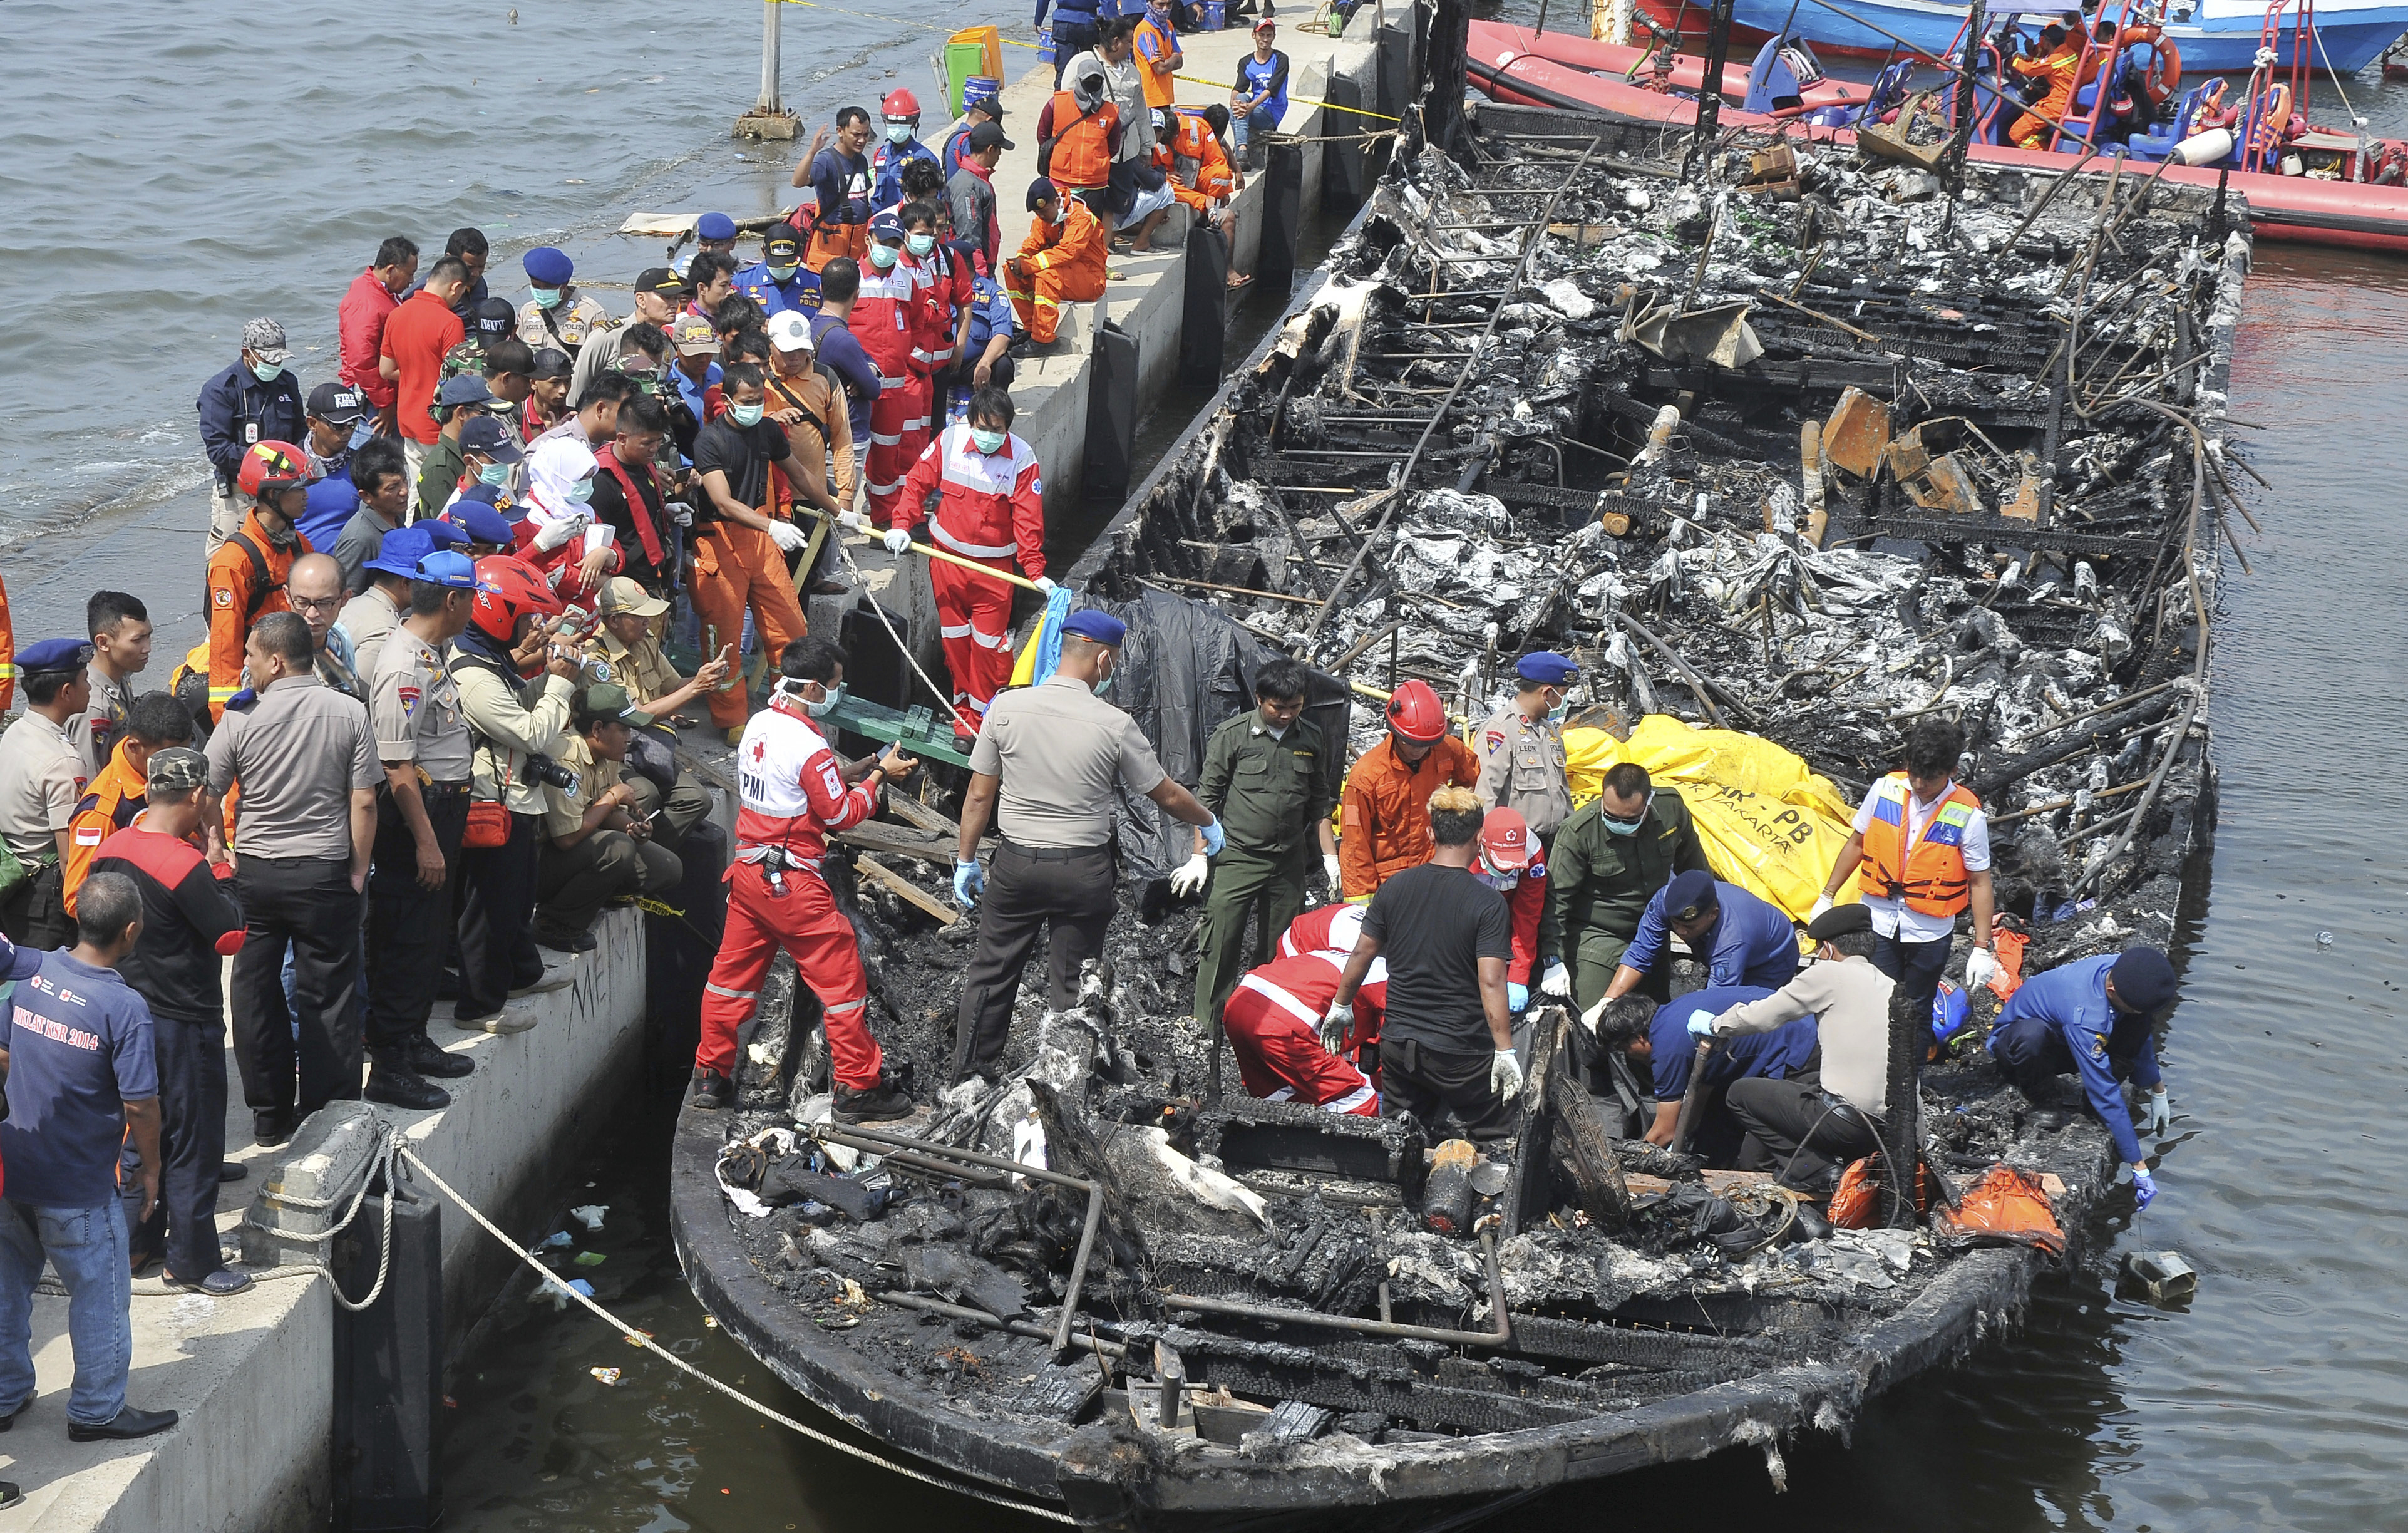 Rescuers search for victims from the wreckage of a ferry that caught fire off the coast of Jakarta on Jan. 1, 2017. (Rhana Ananda—AP)